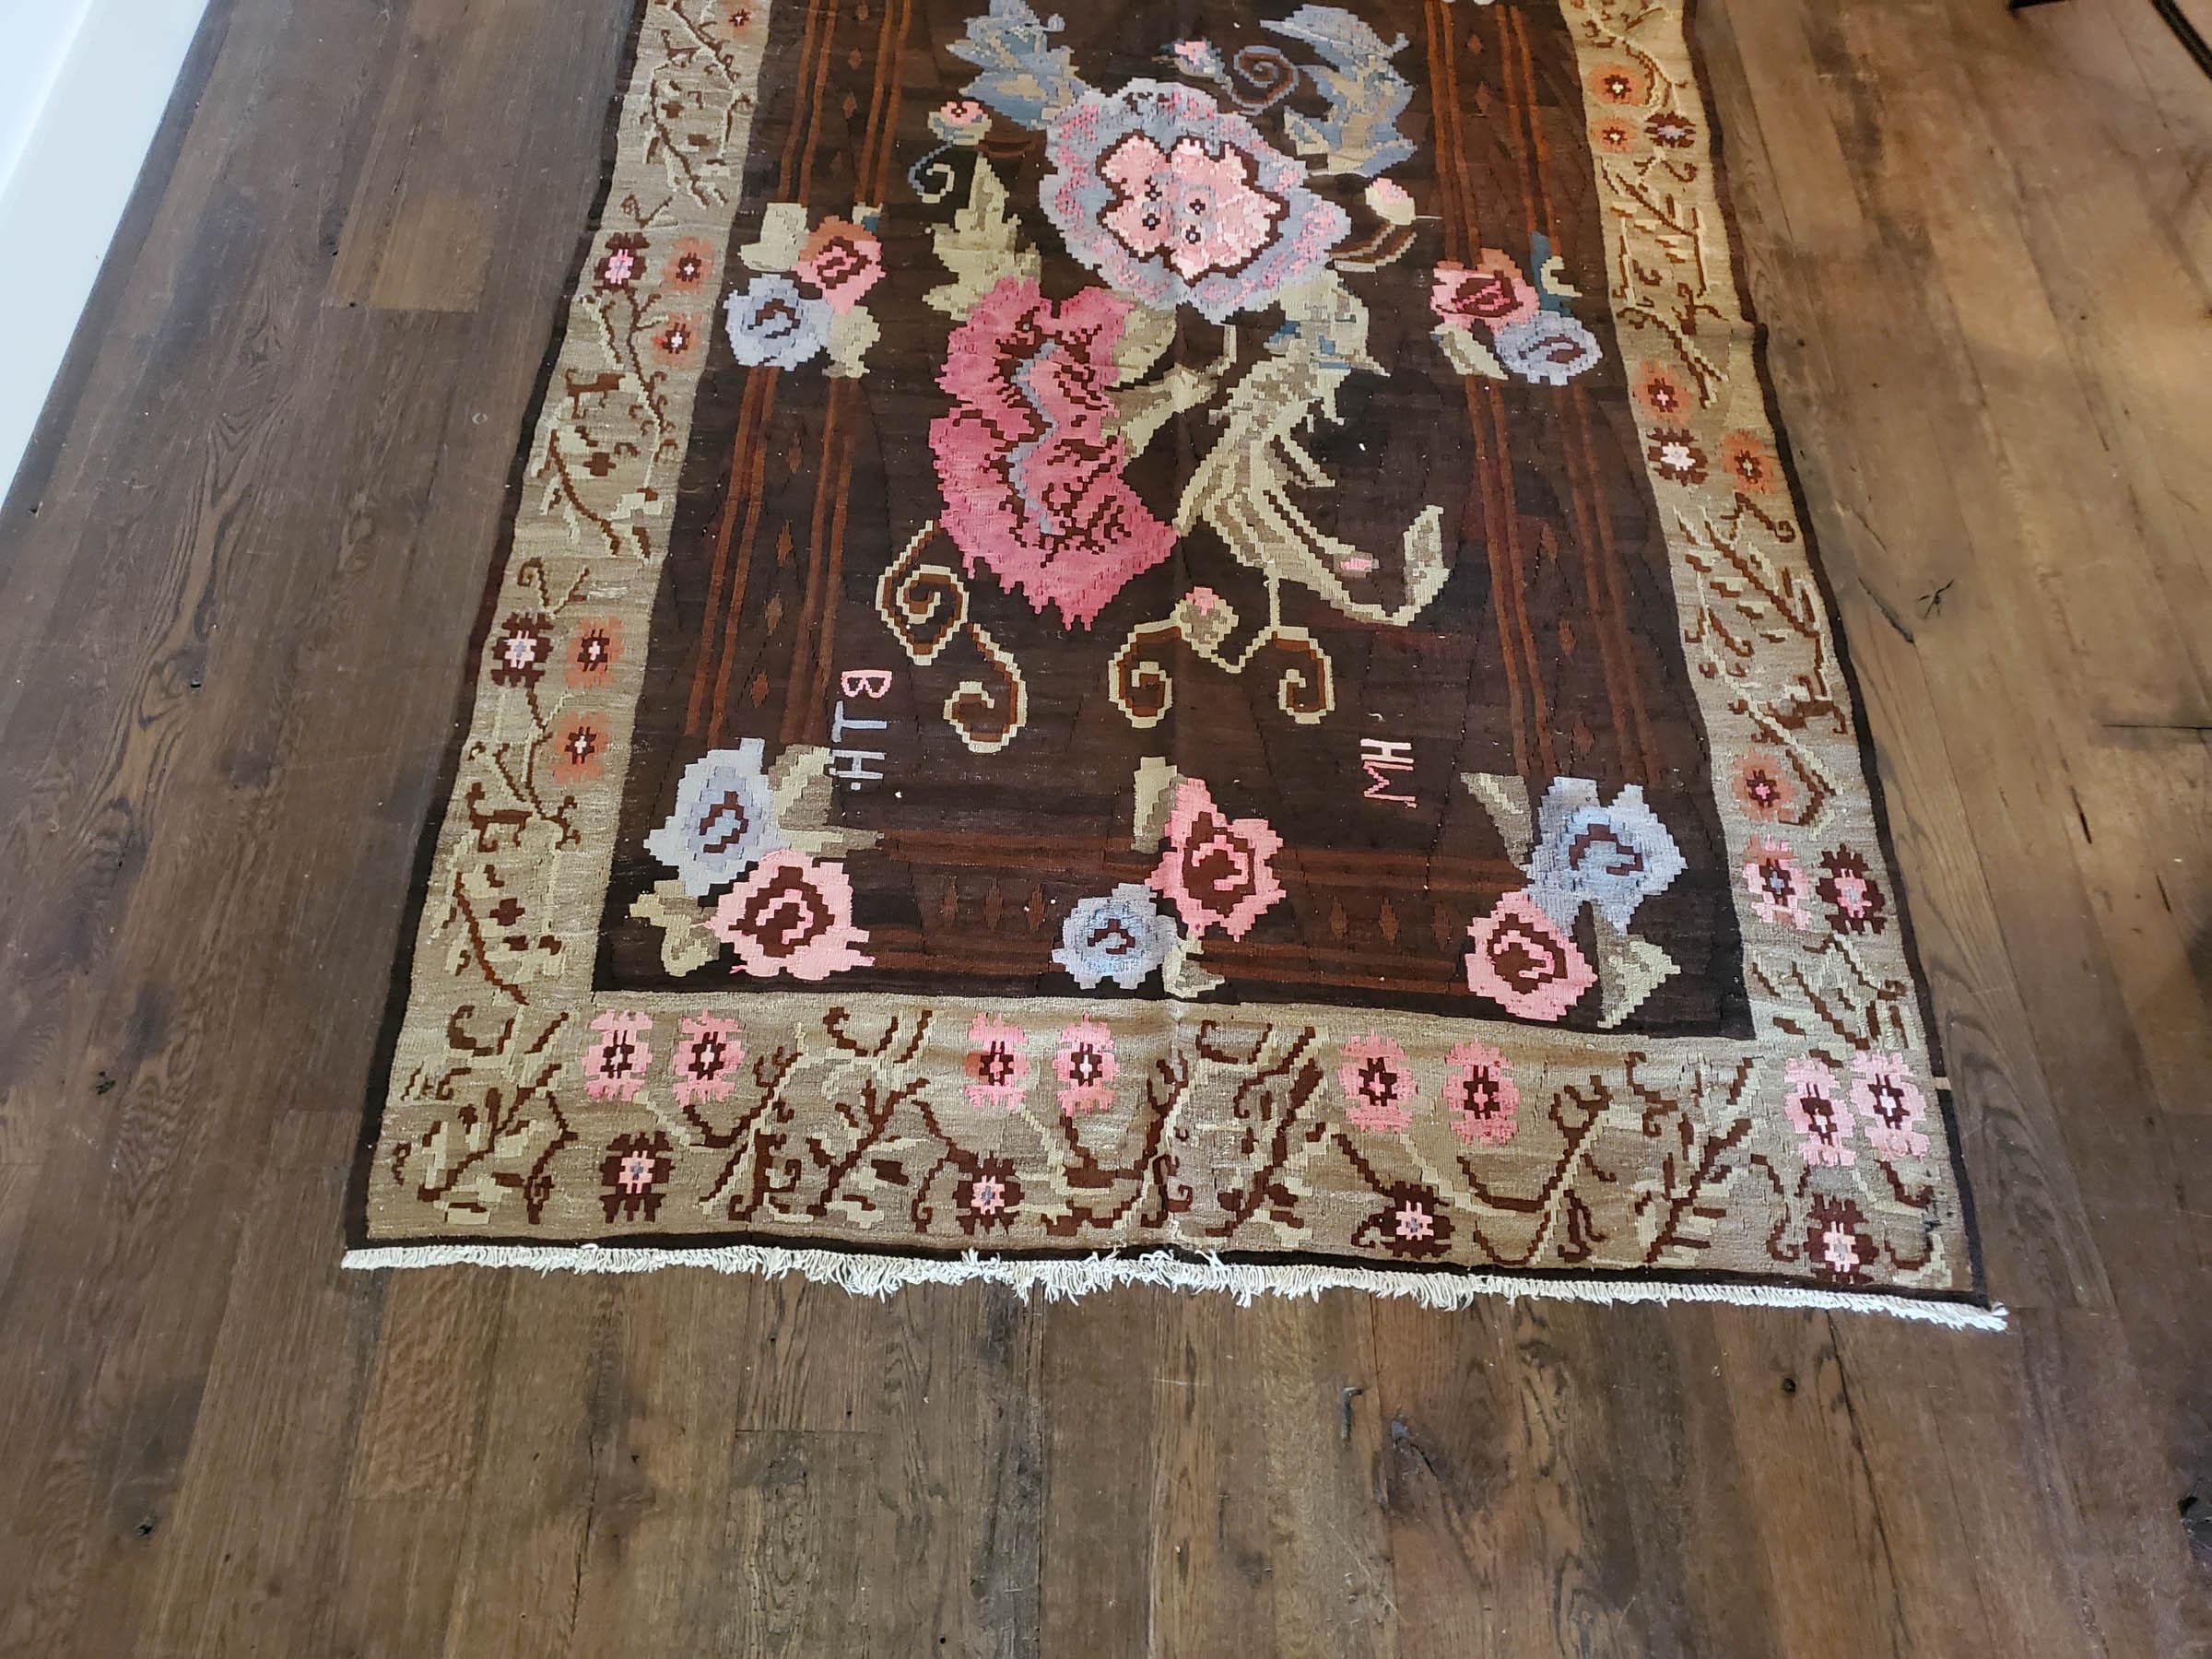 Floral bessarabian design. A hardy strong flat-weave with elaborate pink flowers floating and smaller blossoms in pale blue, ivory, and brown.